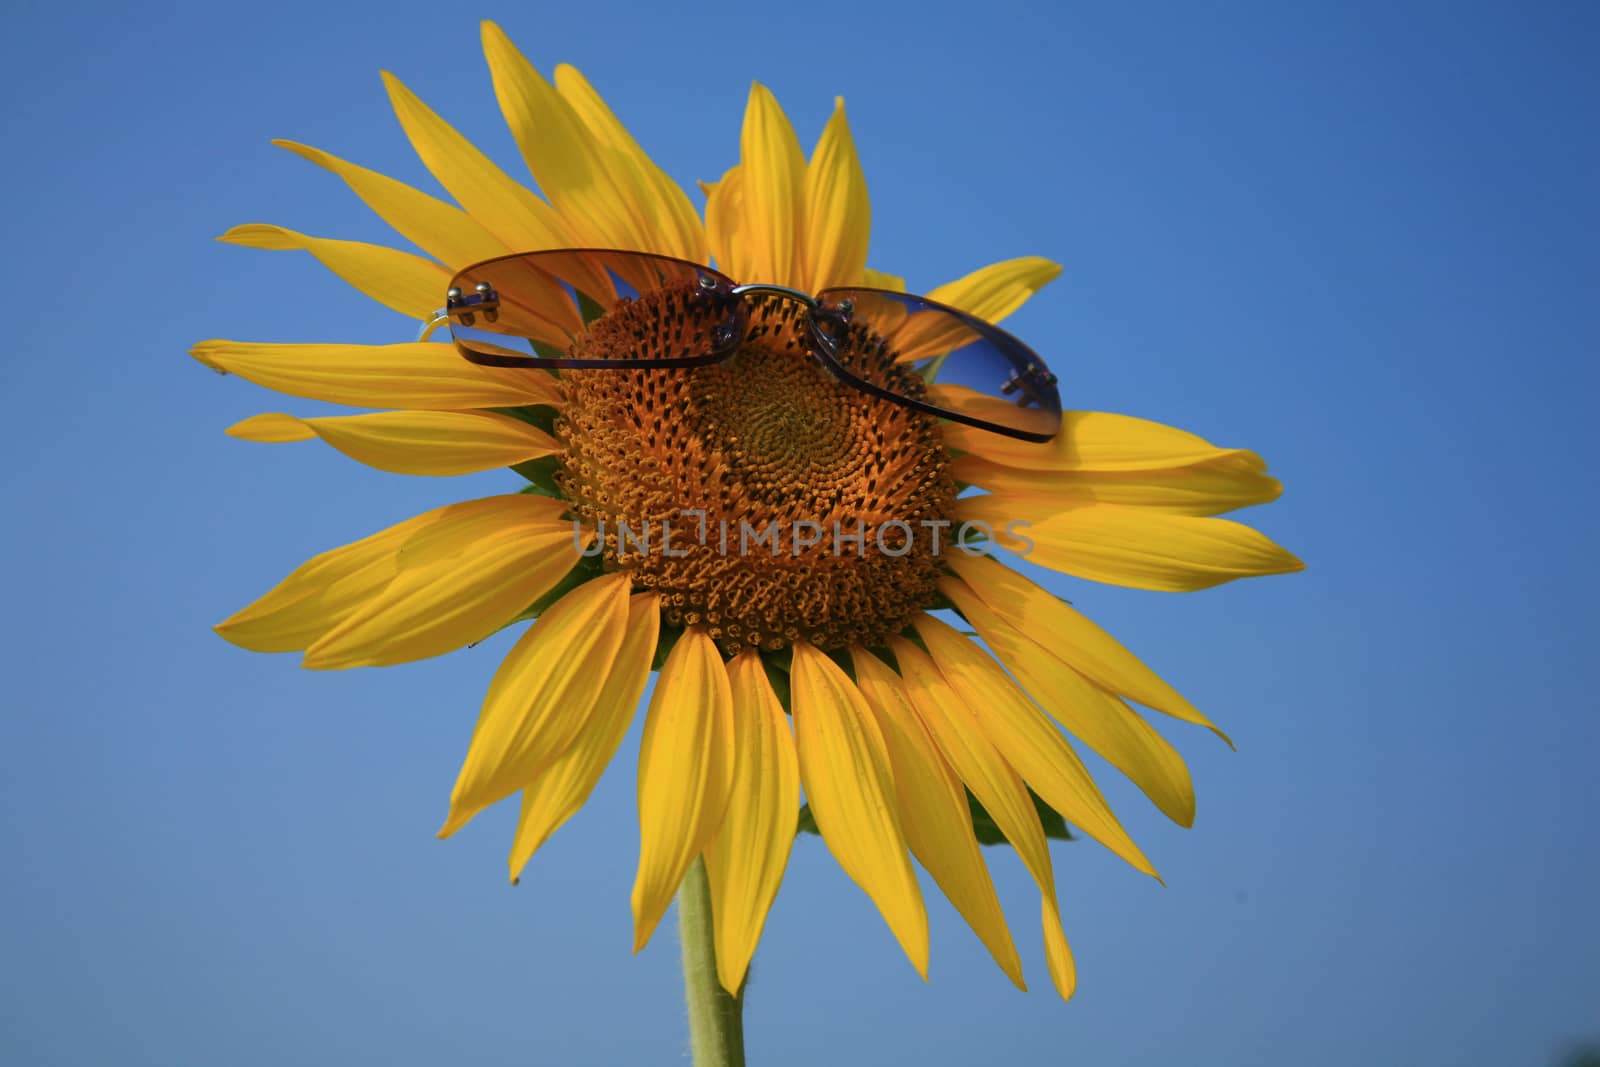 yellow sunflower in sunglasses with blue sky, Thailand.